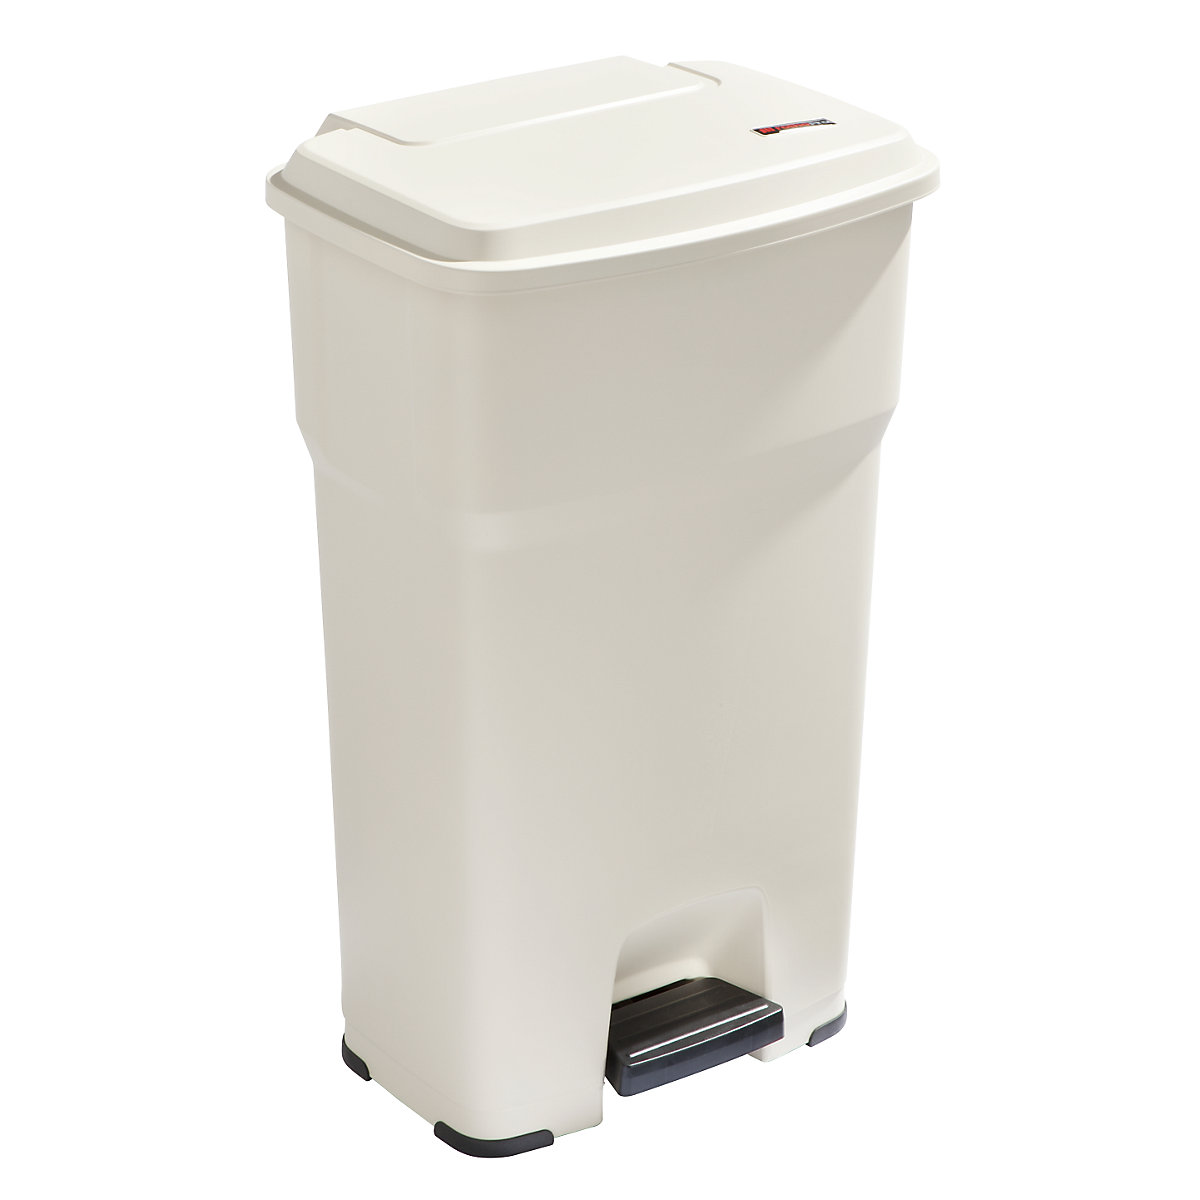 rothopro – HERA waste collector with pedal, capacity 85 l, WxHxD 490 x 790 x 390 mm, beige